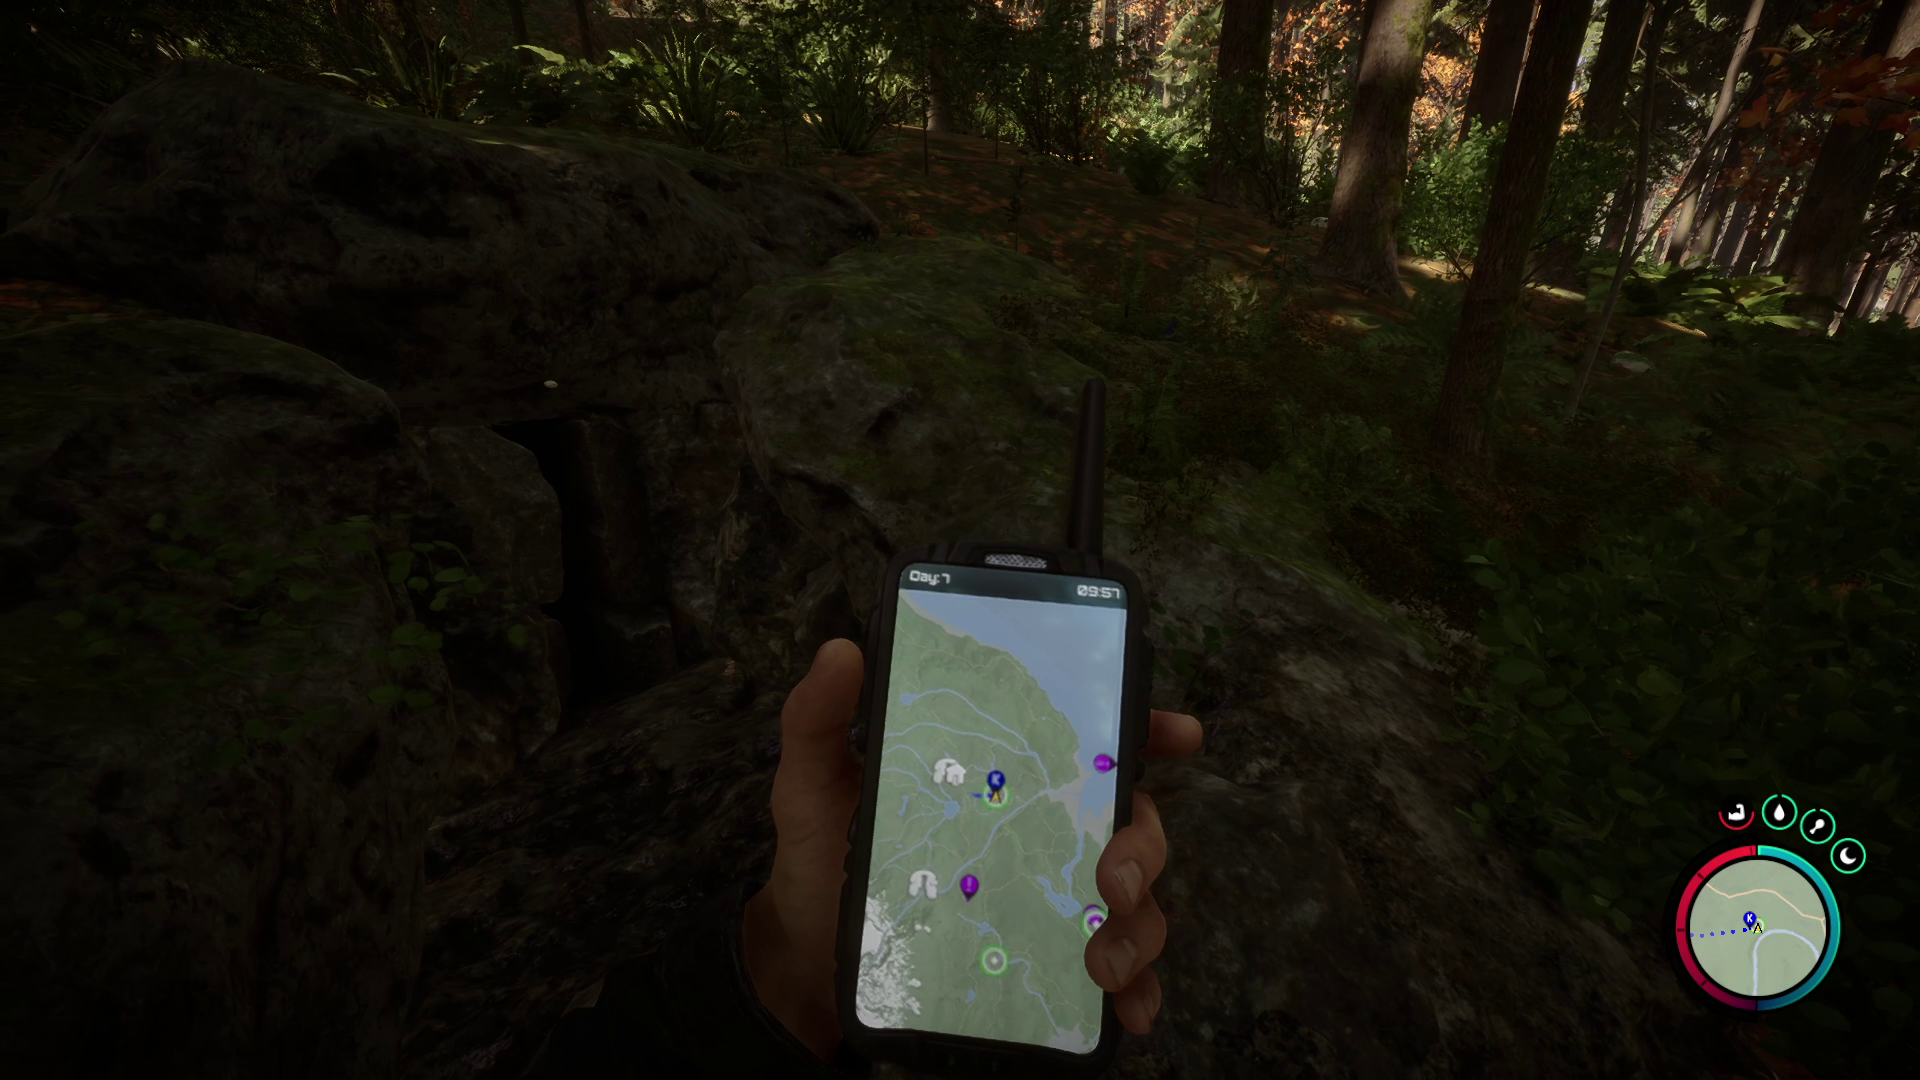 Sons of the Forest: Where to Find the Guest Keycard Location